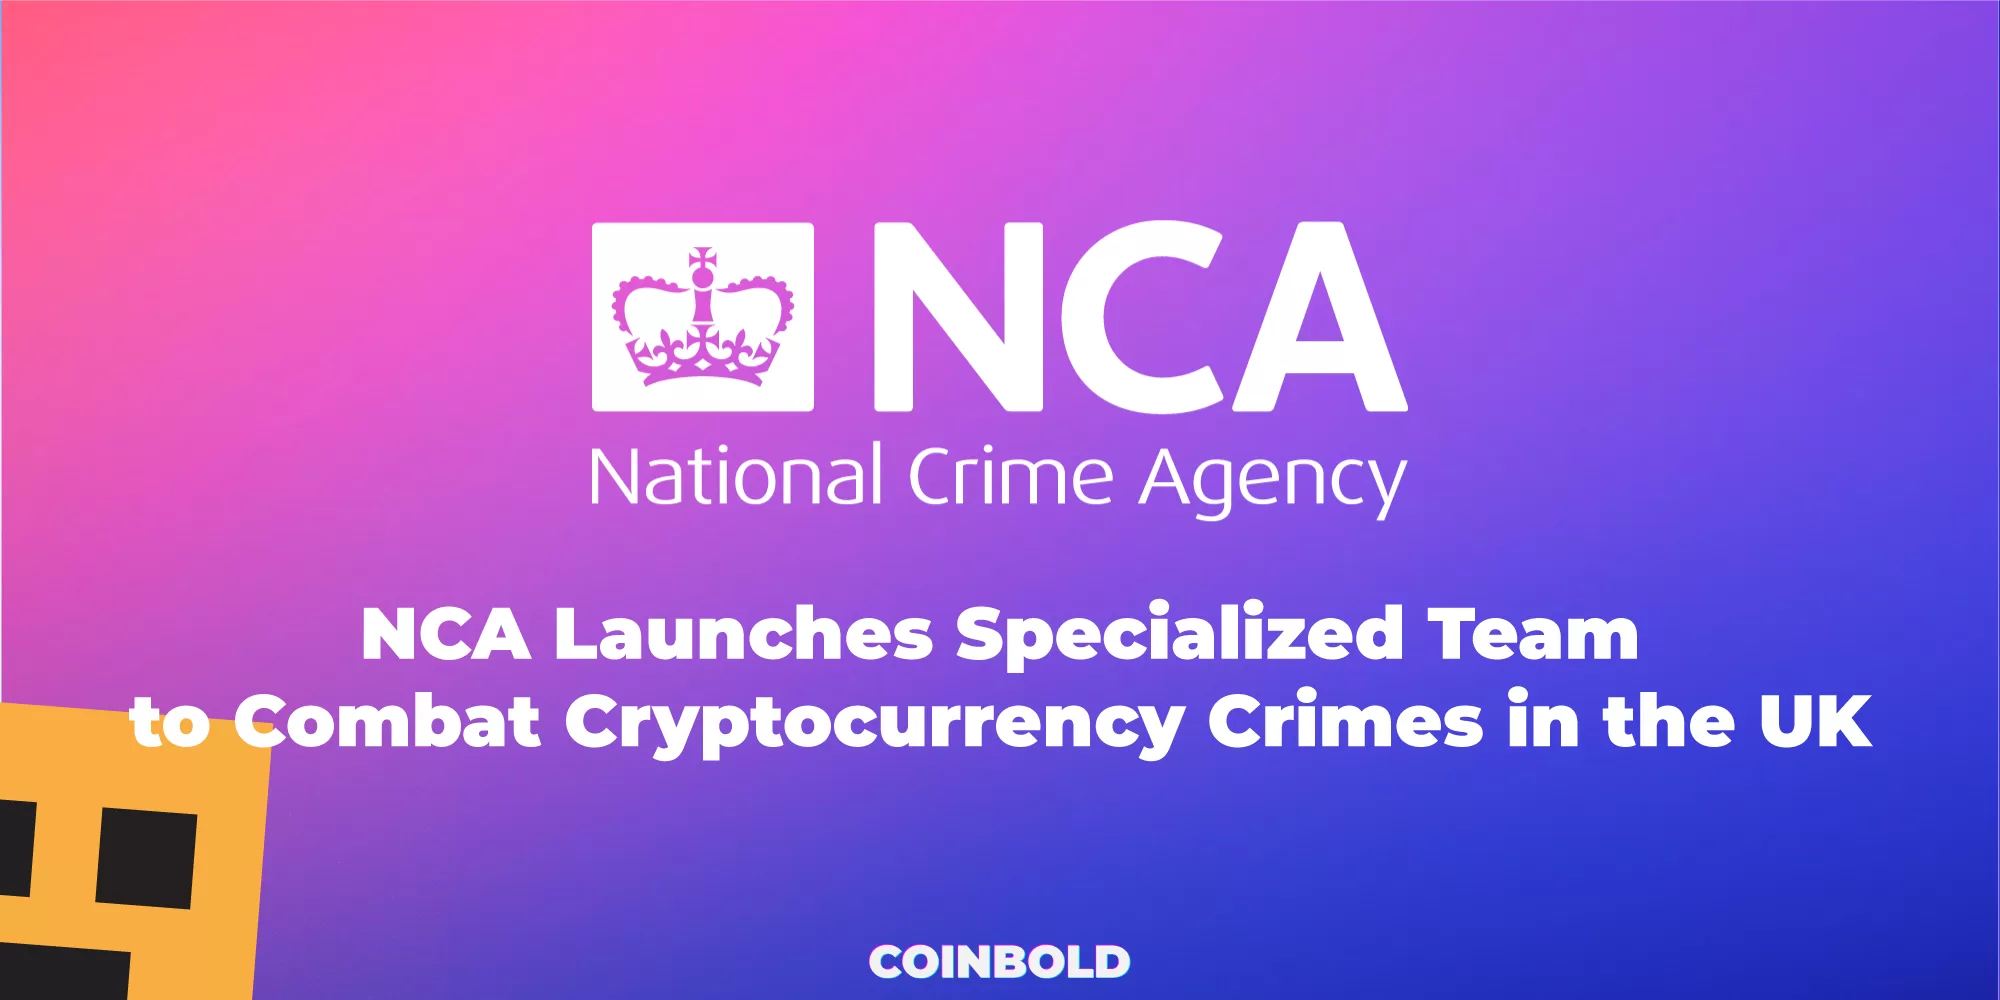 NCA Launches Specialized Team to Combat Cryptocurrency Crimes in the UK